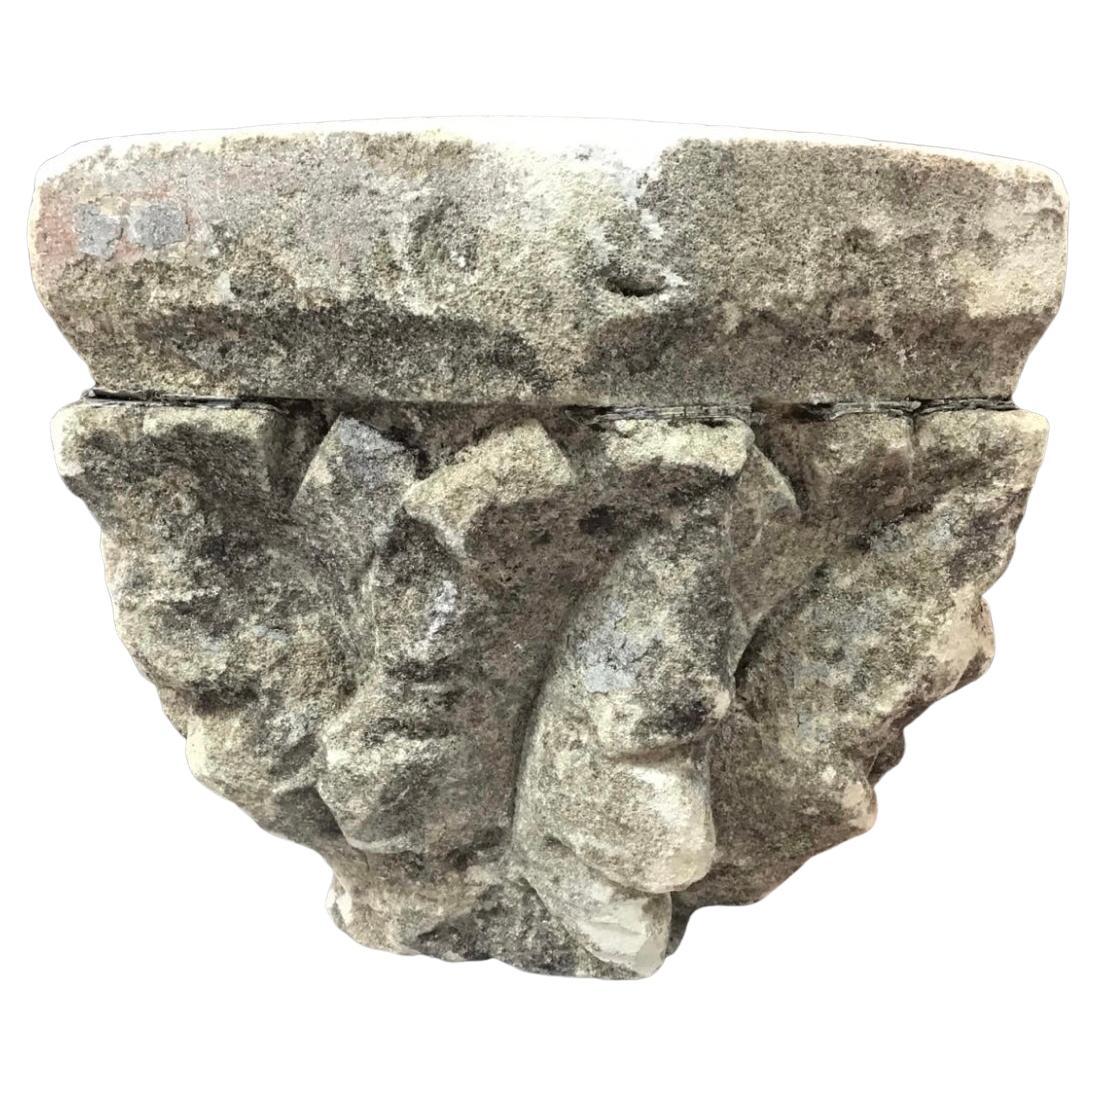 Rare fragment is from the 17th century and would have stood atop a column. It's backside was affixed to the building and it most likely supported molding or an arch which were seen throughout the medieval period buildings and into the early 1600s.